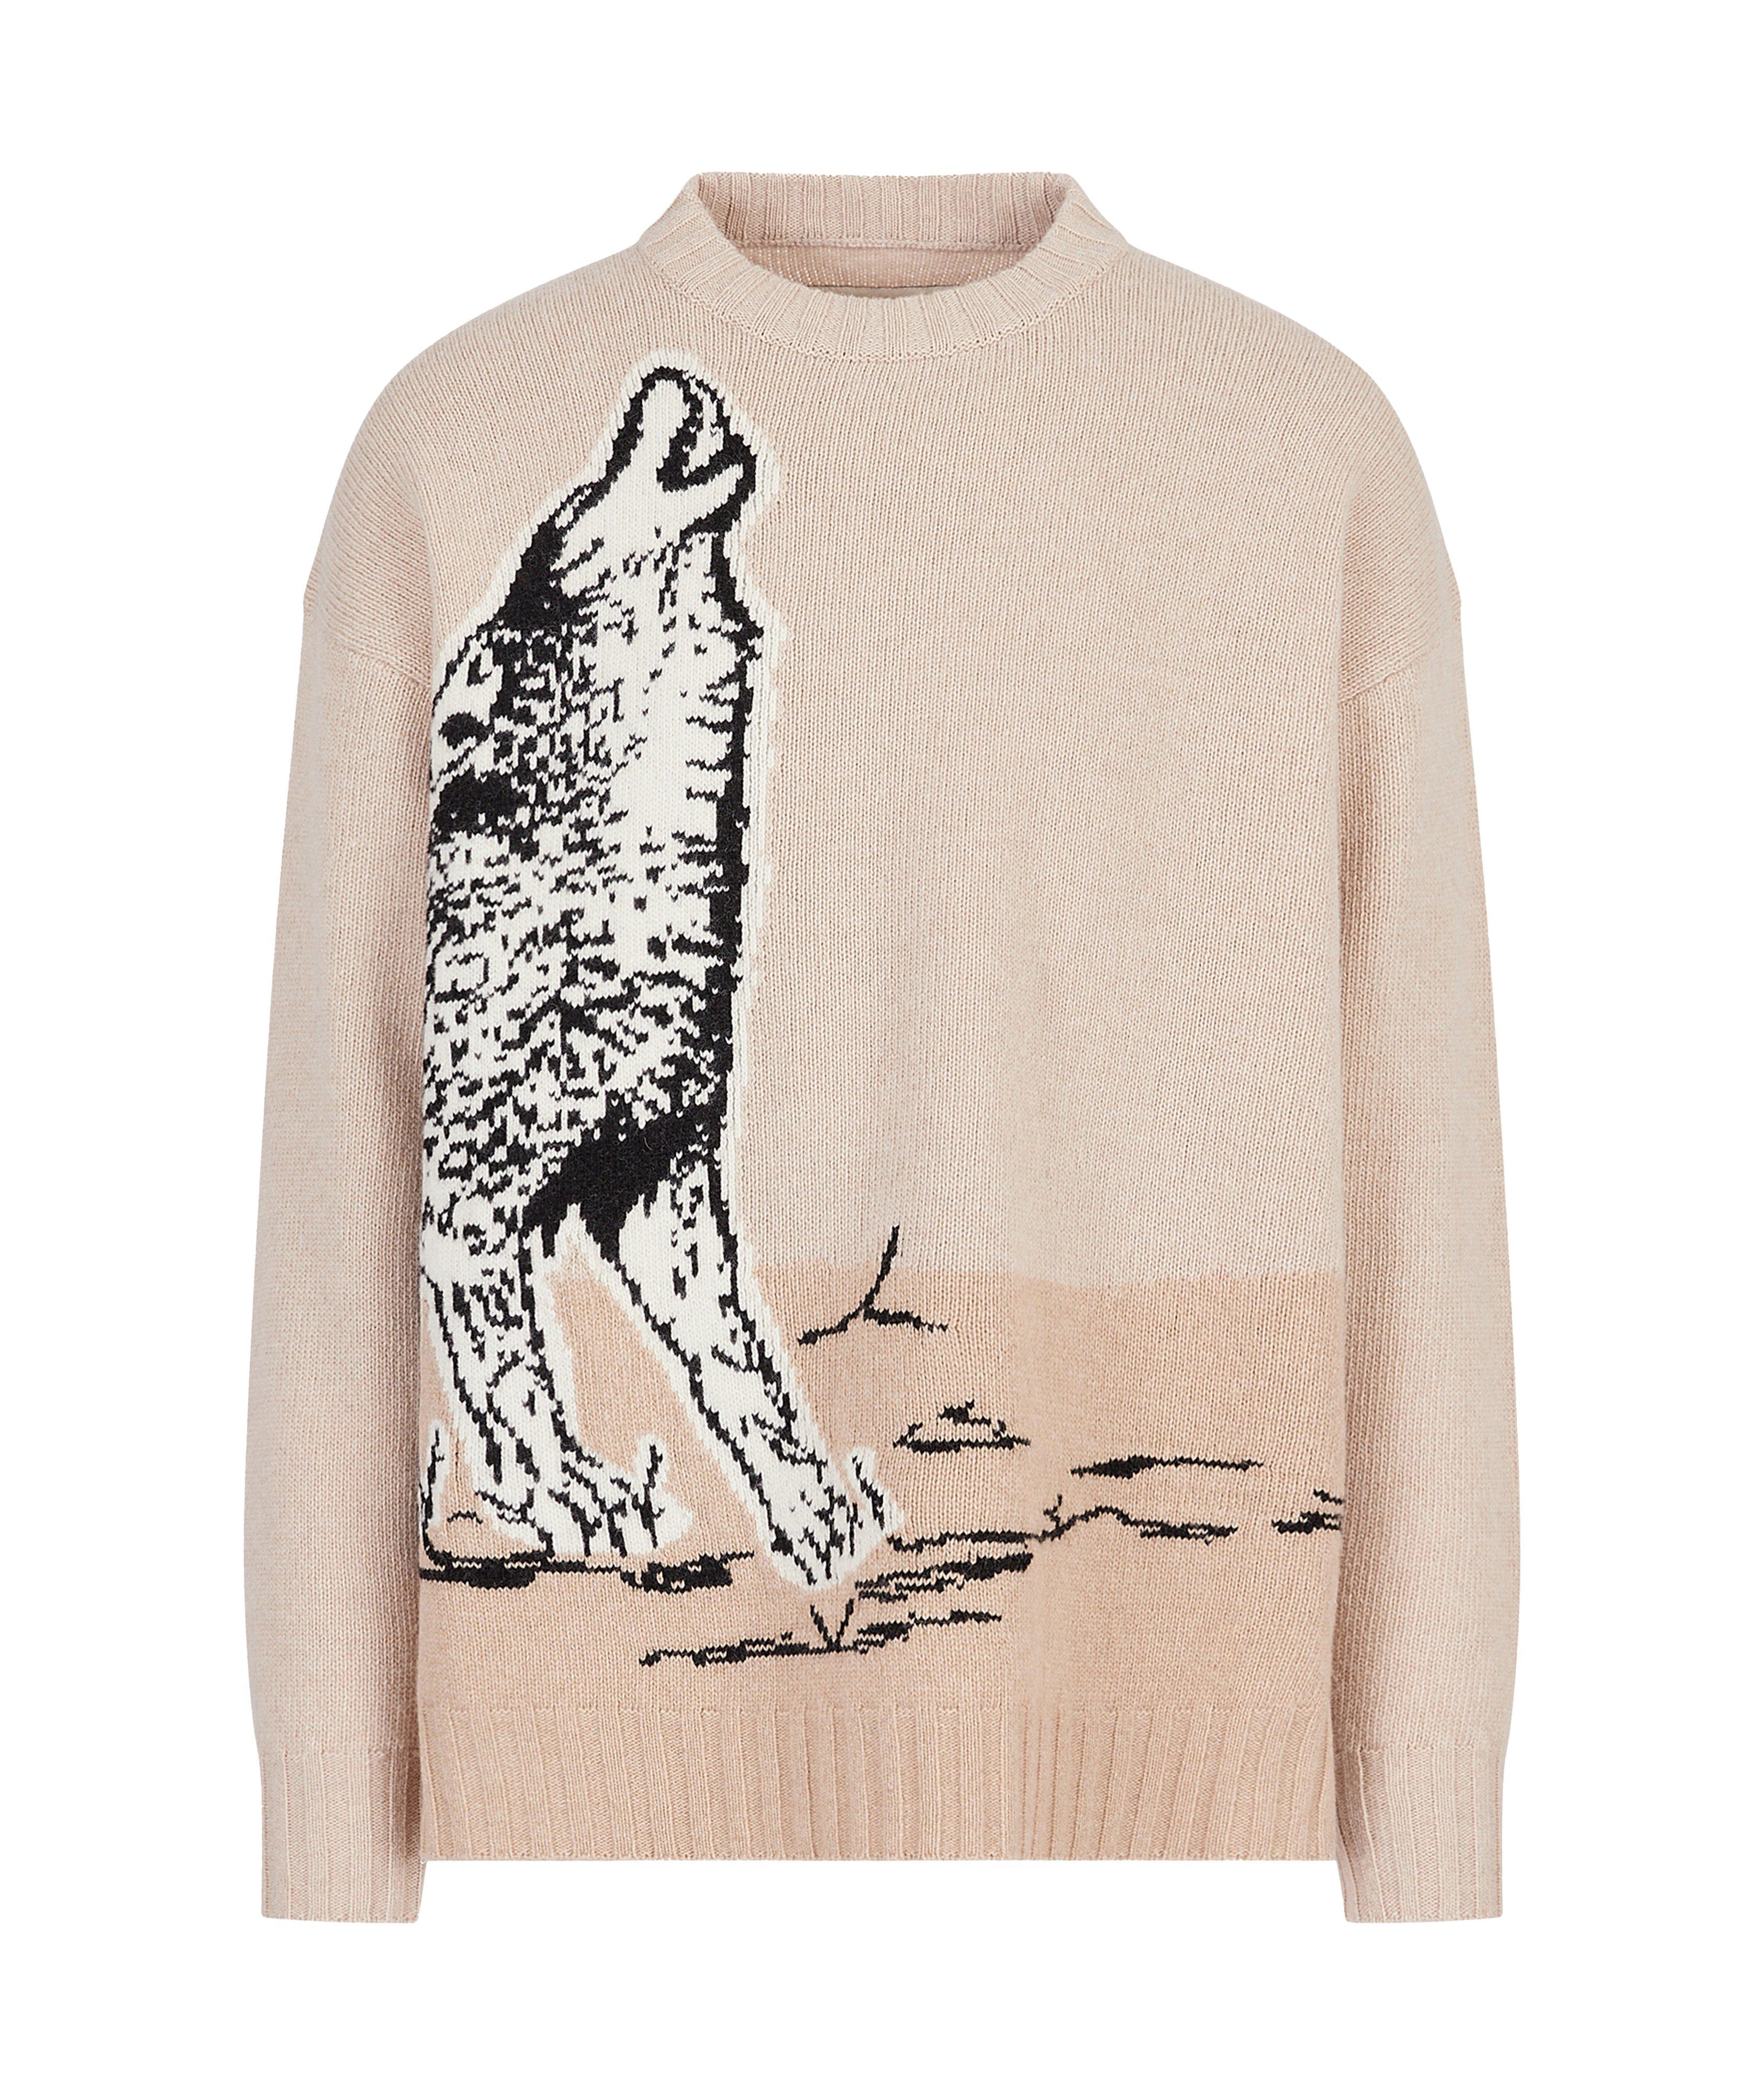 Pull en tricot intarsia, collection écoresponsable EArctic image 0